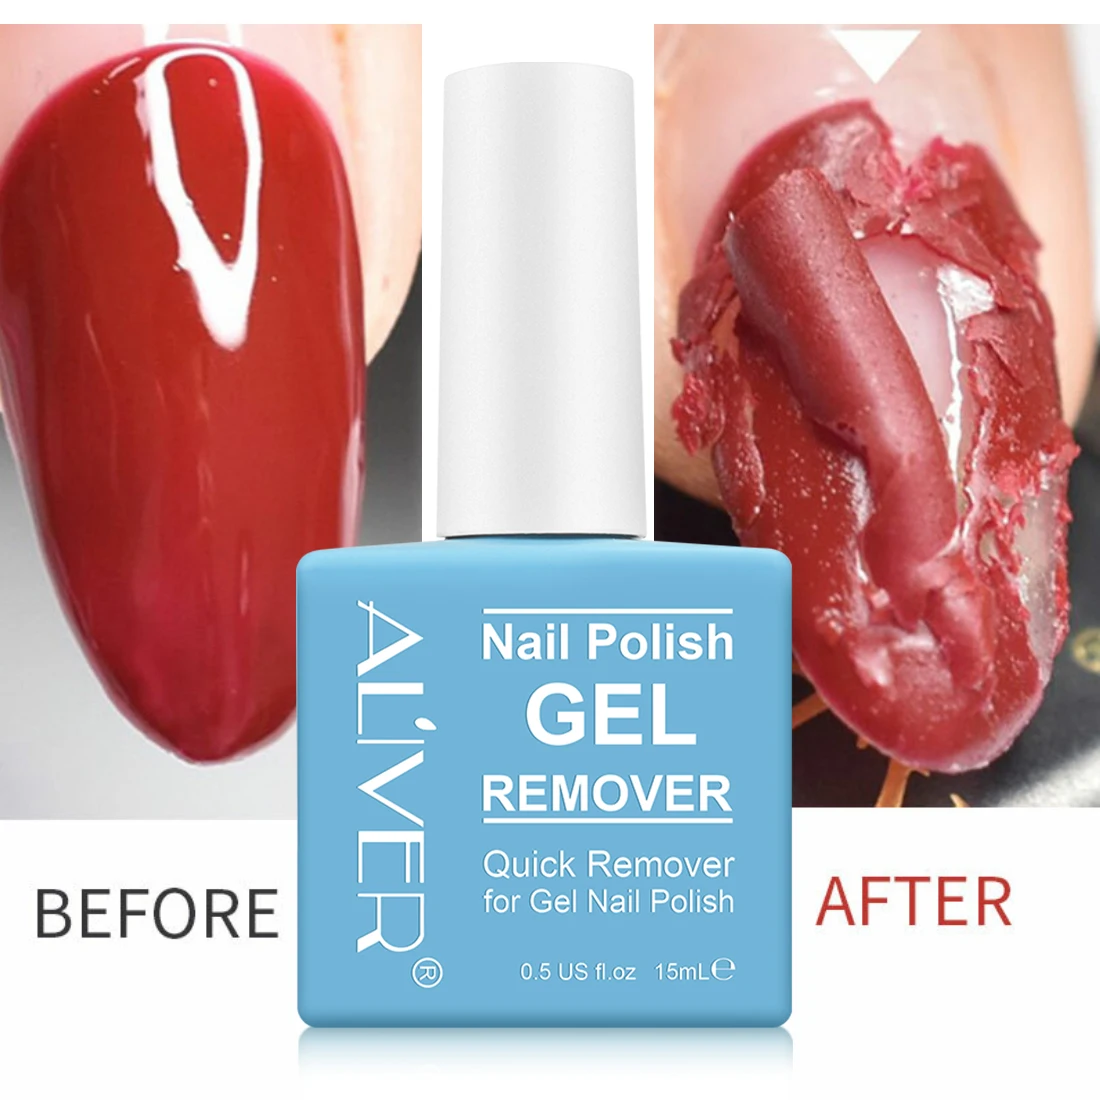 
Magic nail polish remover that quickly and easily removes nail gel in 3-5 minutes 